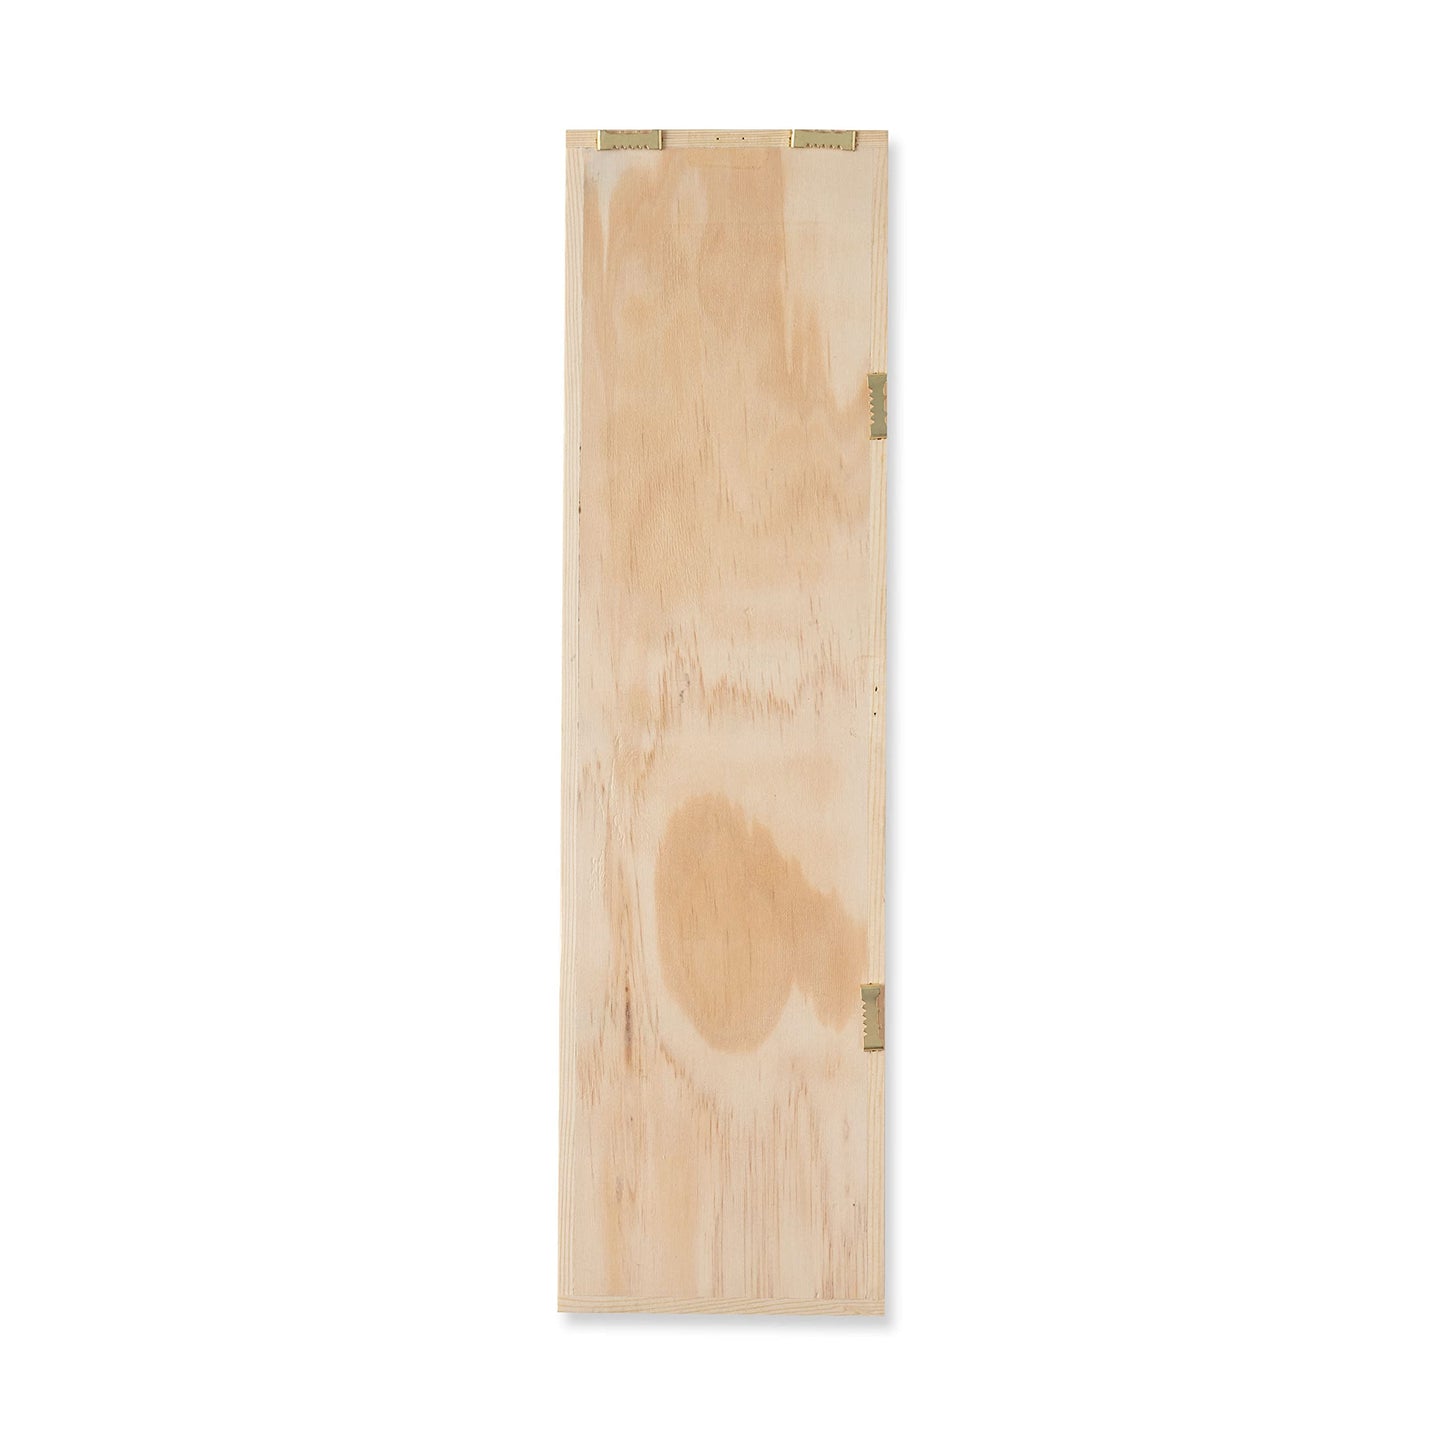 8 Pack: 18”; x 5”; Wood Plaque by Make Market®